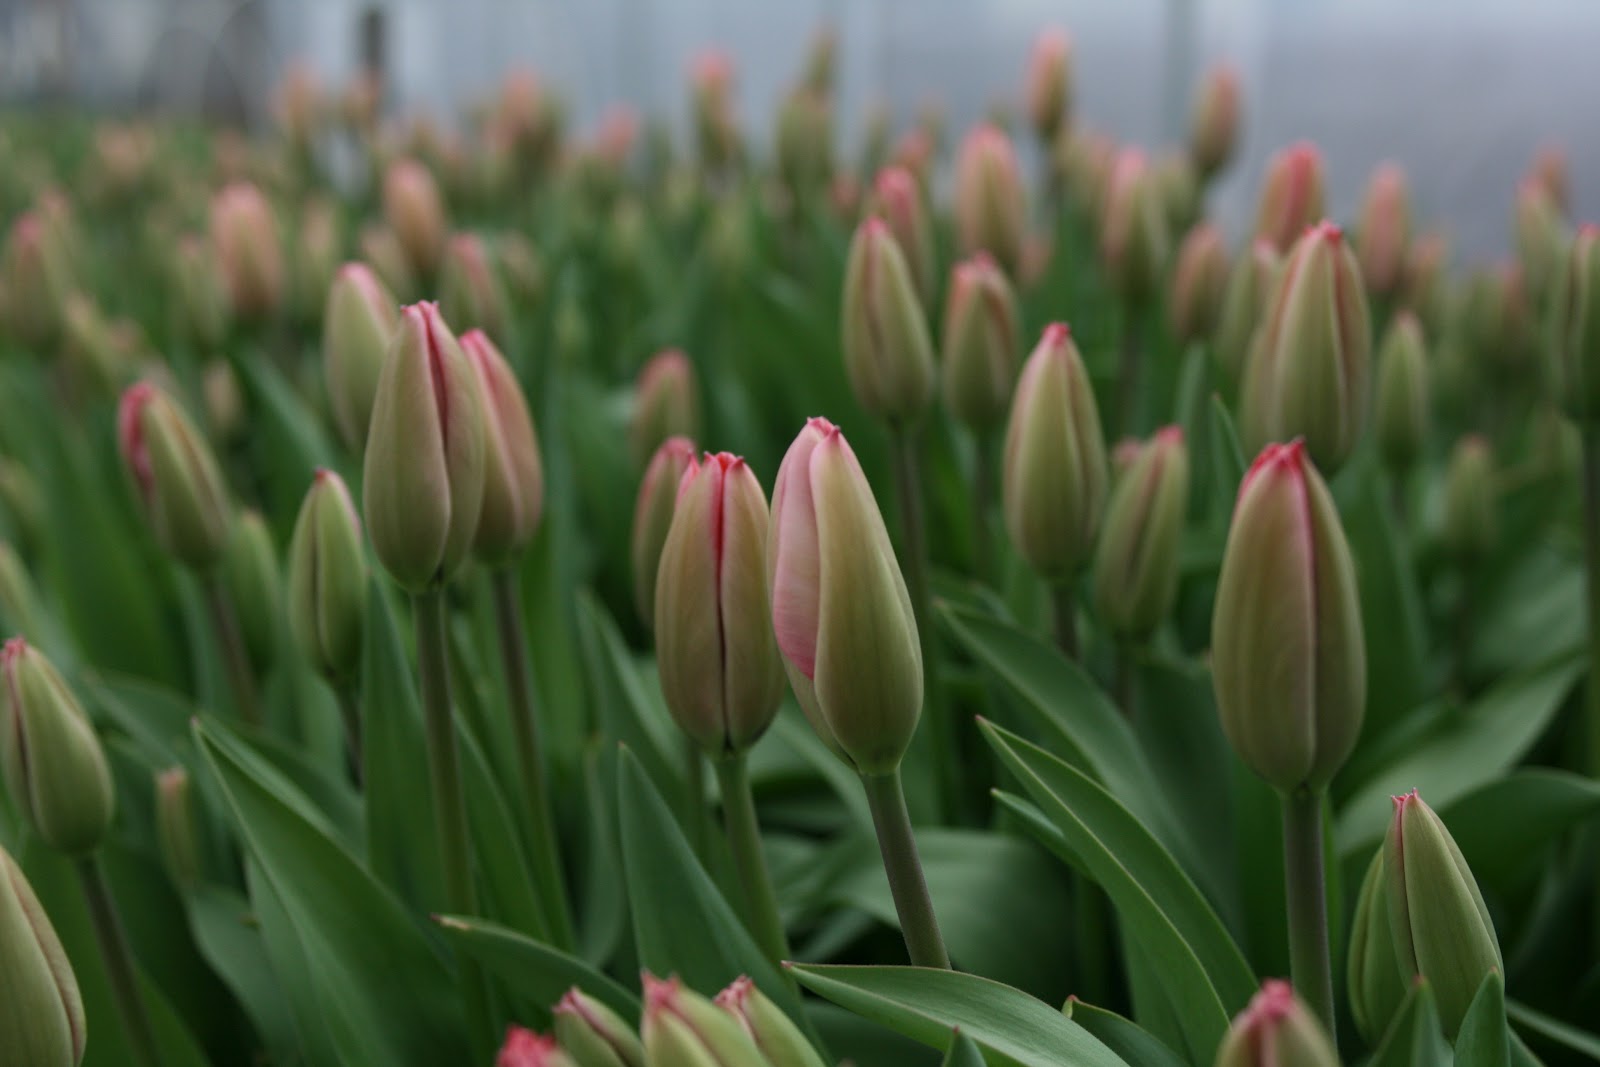 Tulips growing in a greenhouse